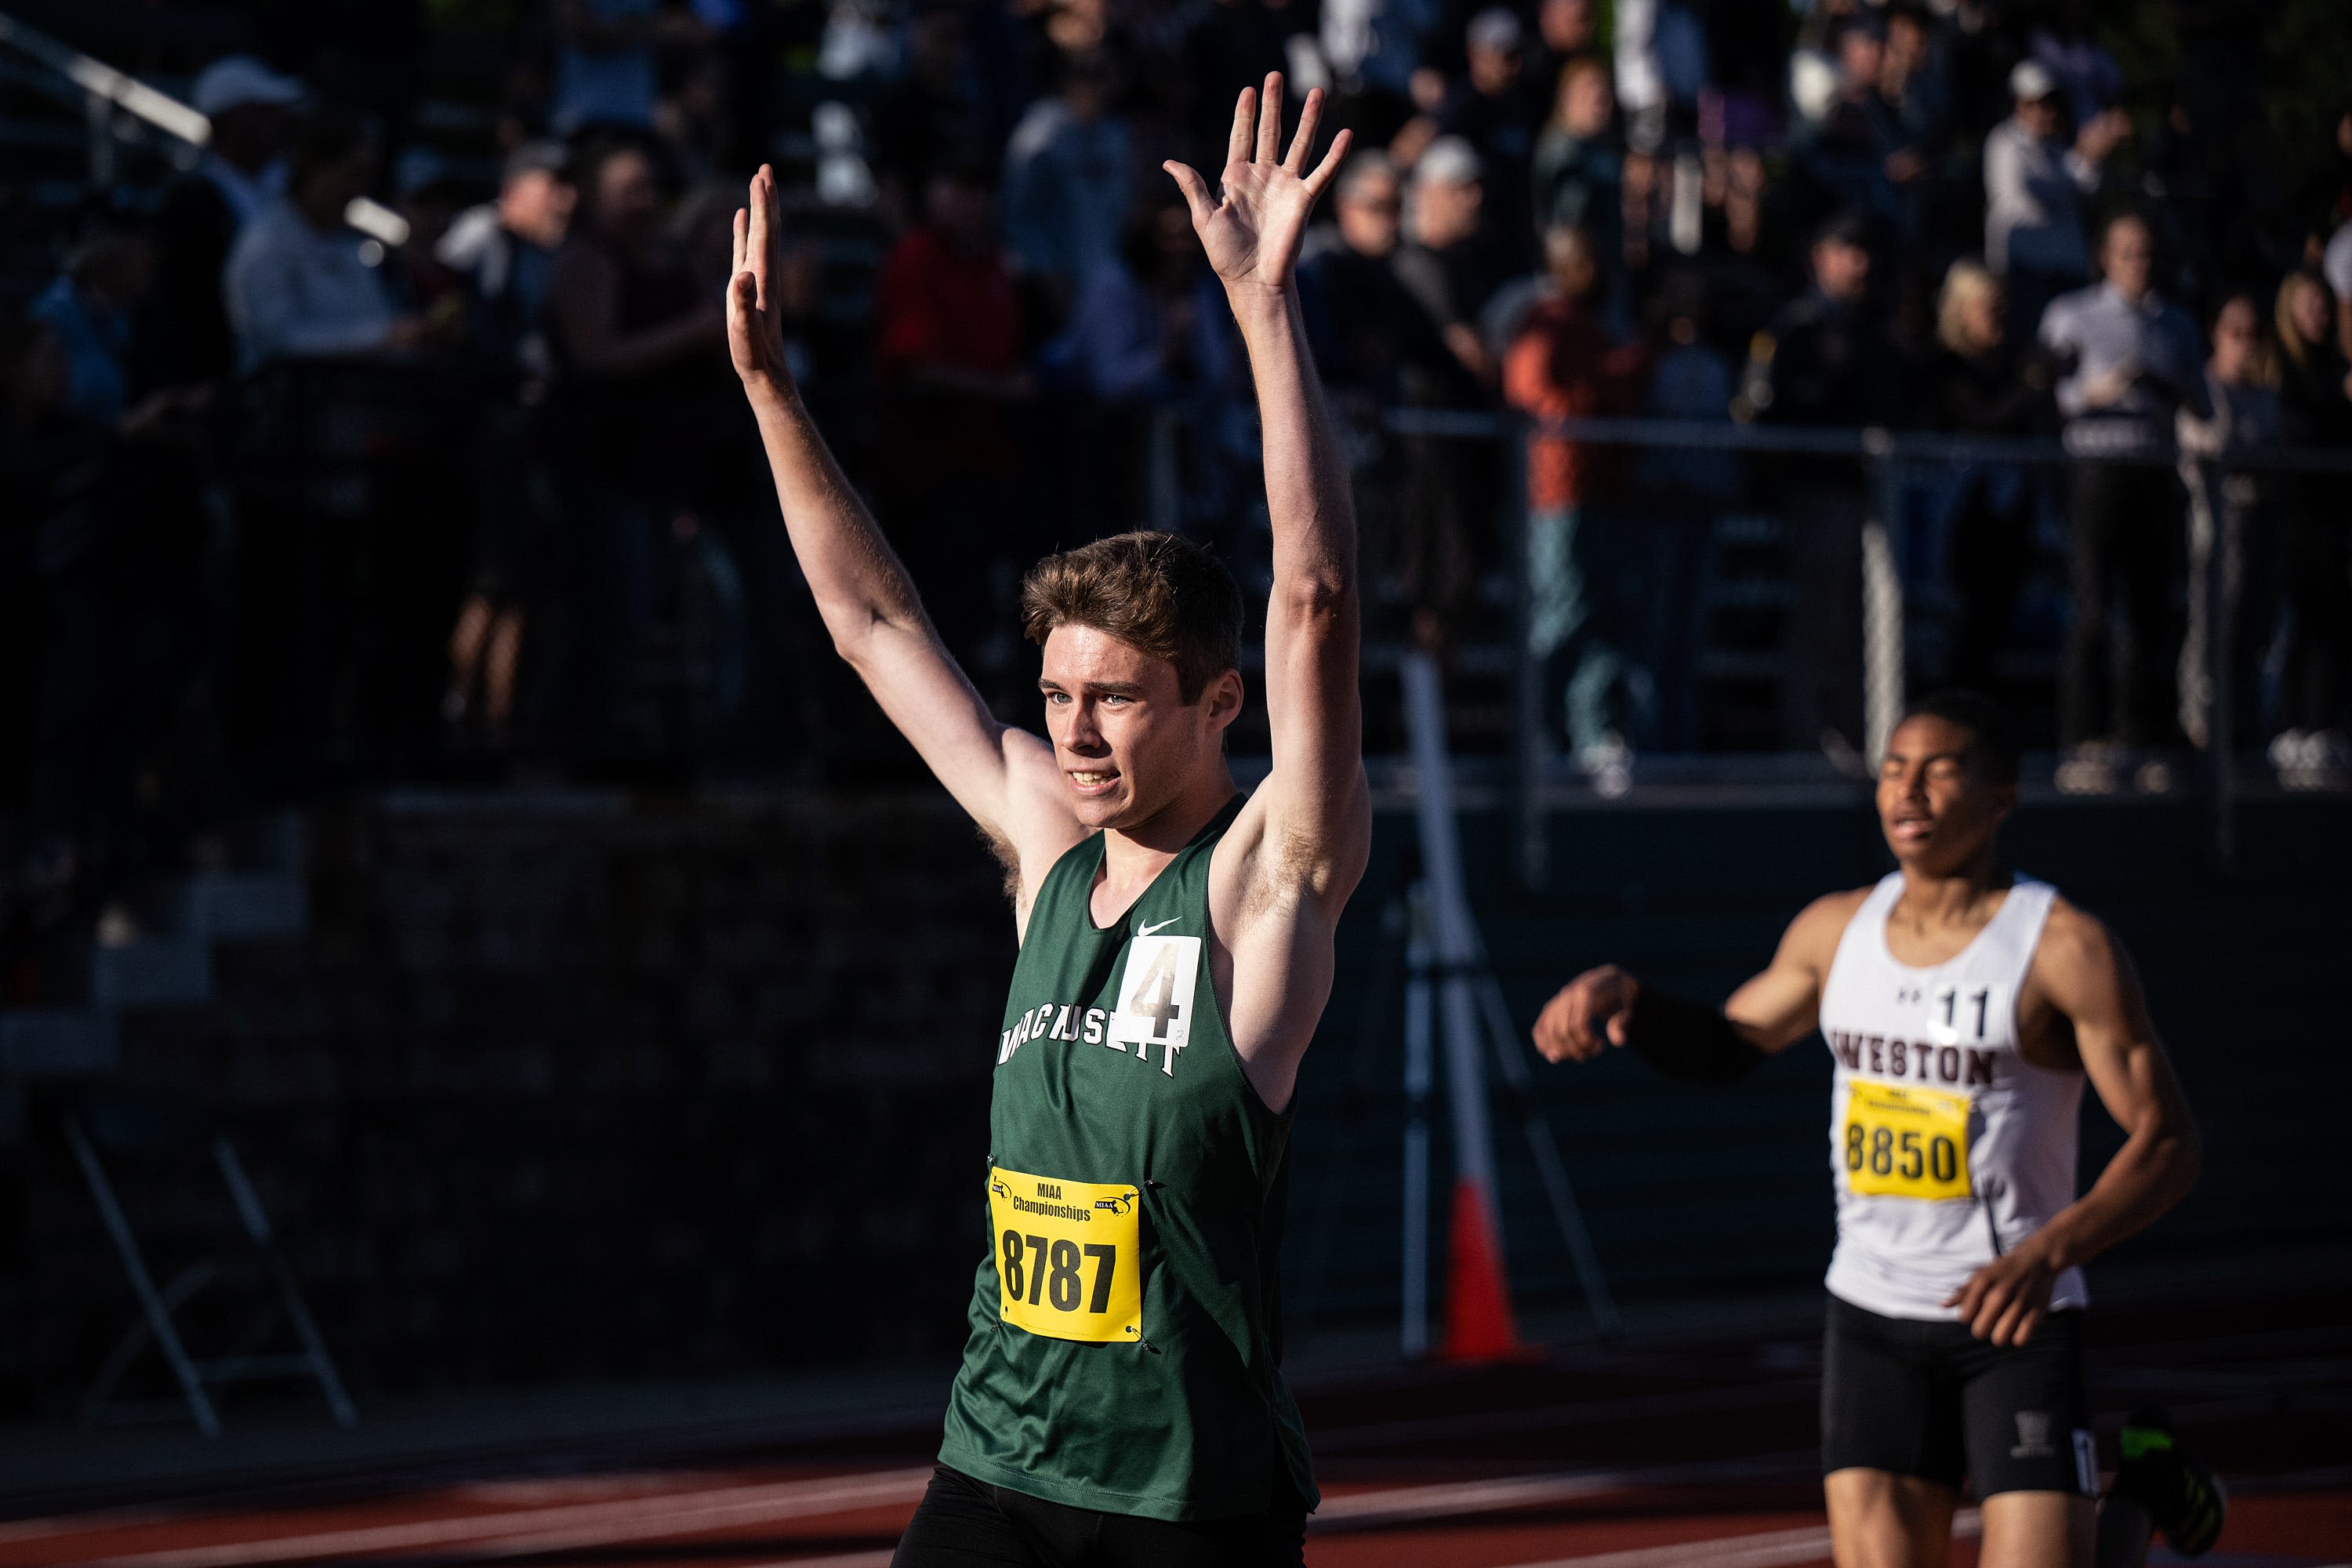 'Perfect way to end': Wachusett's Brenn, St. John's Wiafe leave Meet of Champions with medals